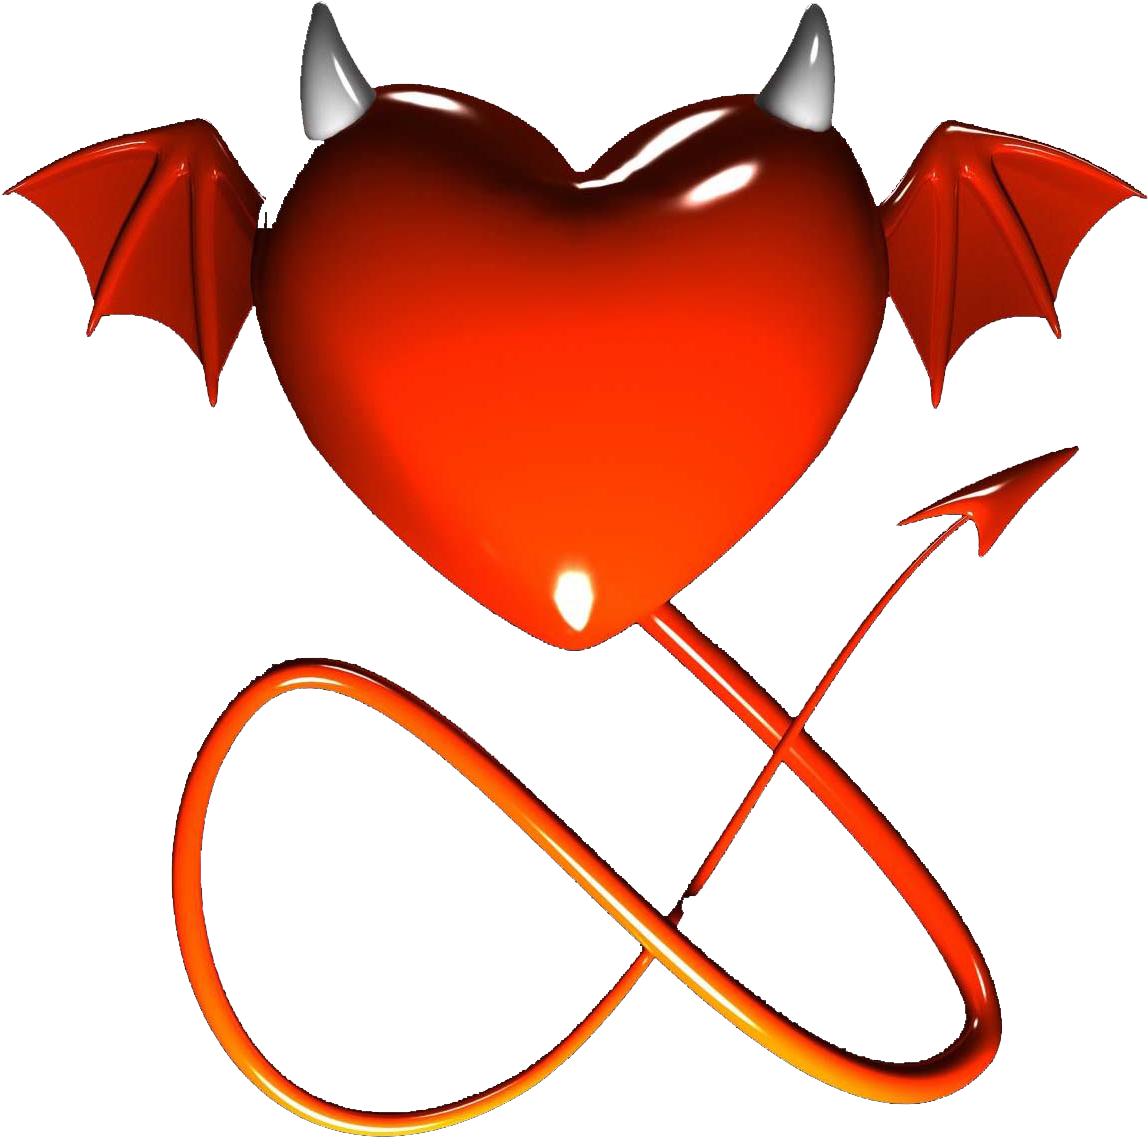 Heart With Devil Horns Tattoo - Heart With Devil Horns Tattoo (1148x1137)